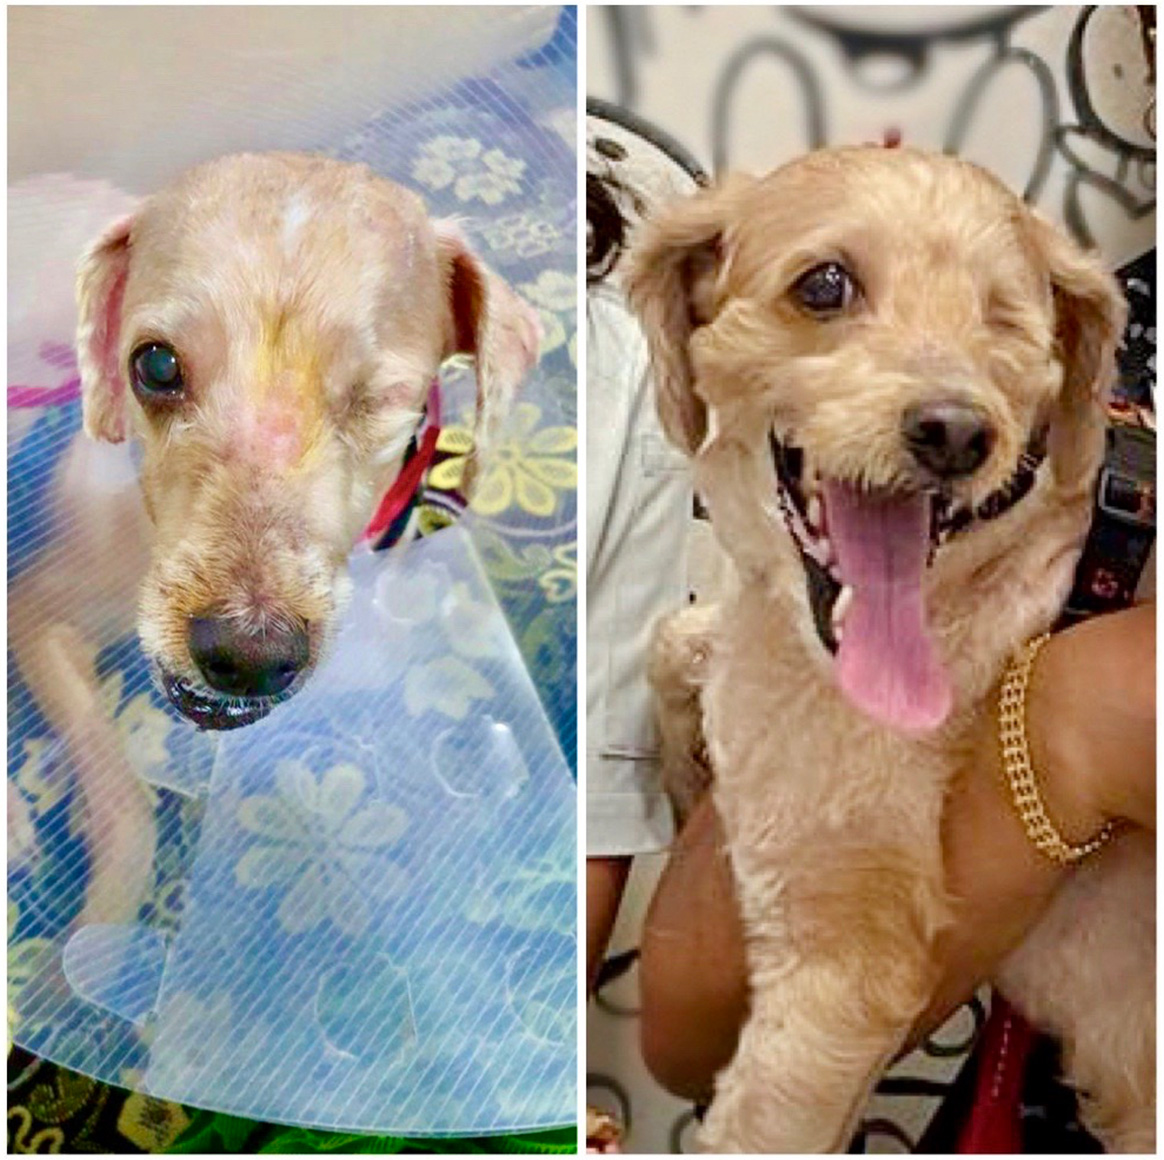 A split image showing a dog's transformation; on the left, a dog appears unwell with a protective cone, and on the right, the same dog looks healthy and happy, held by someone, tongue out.